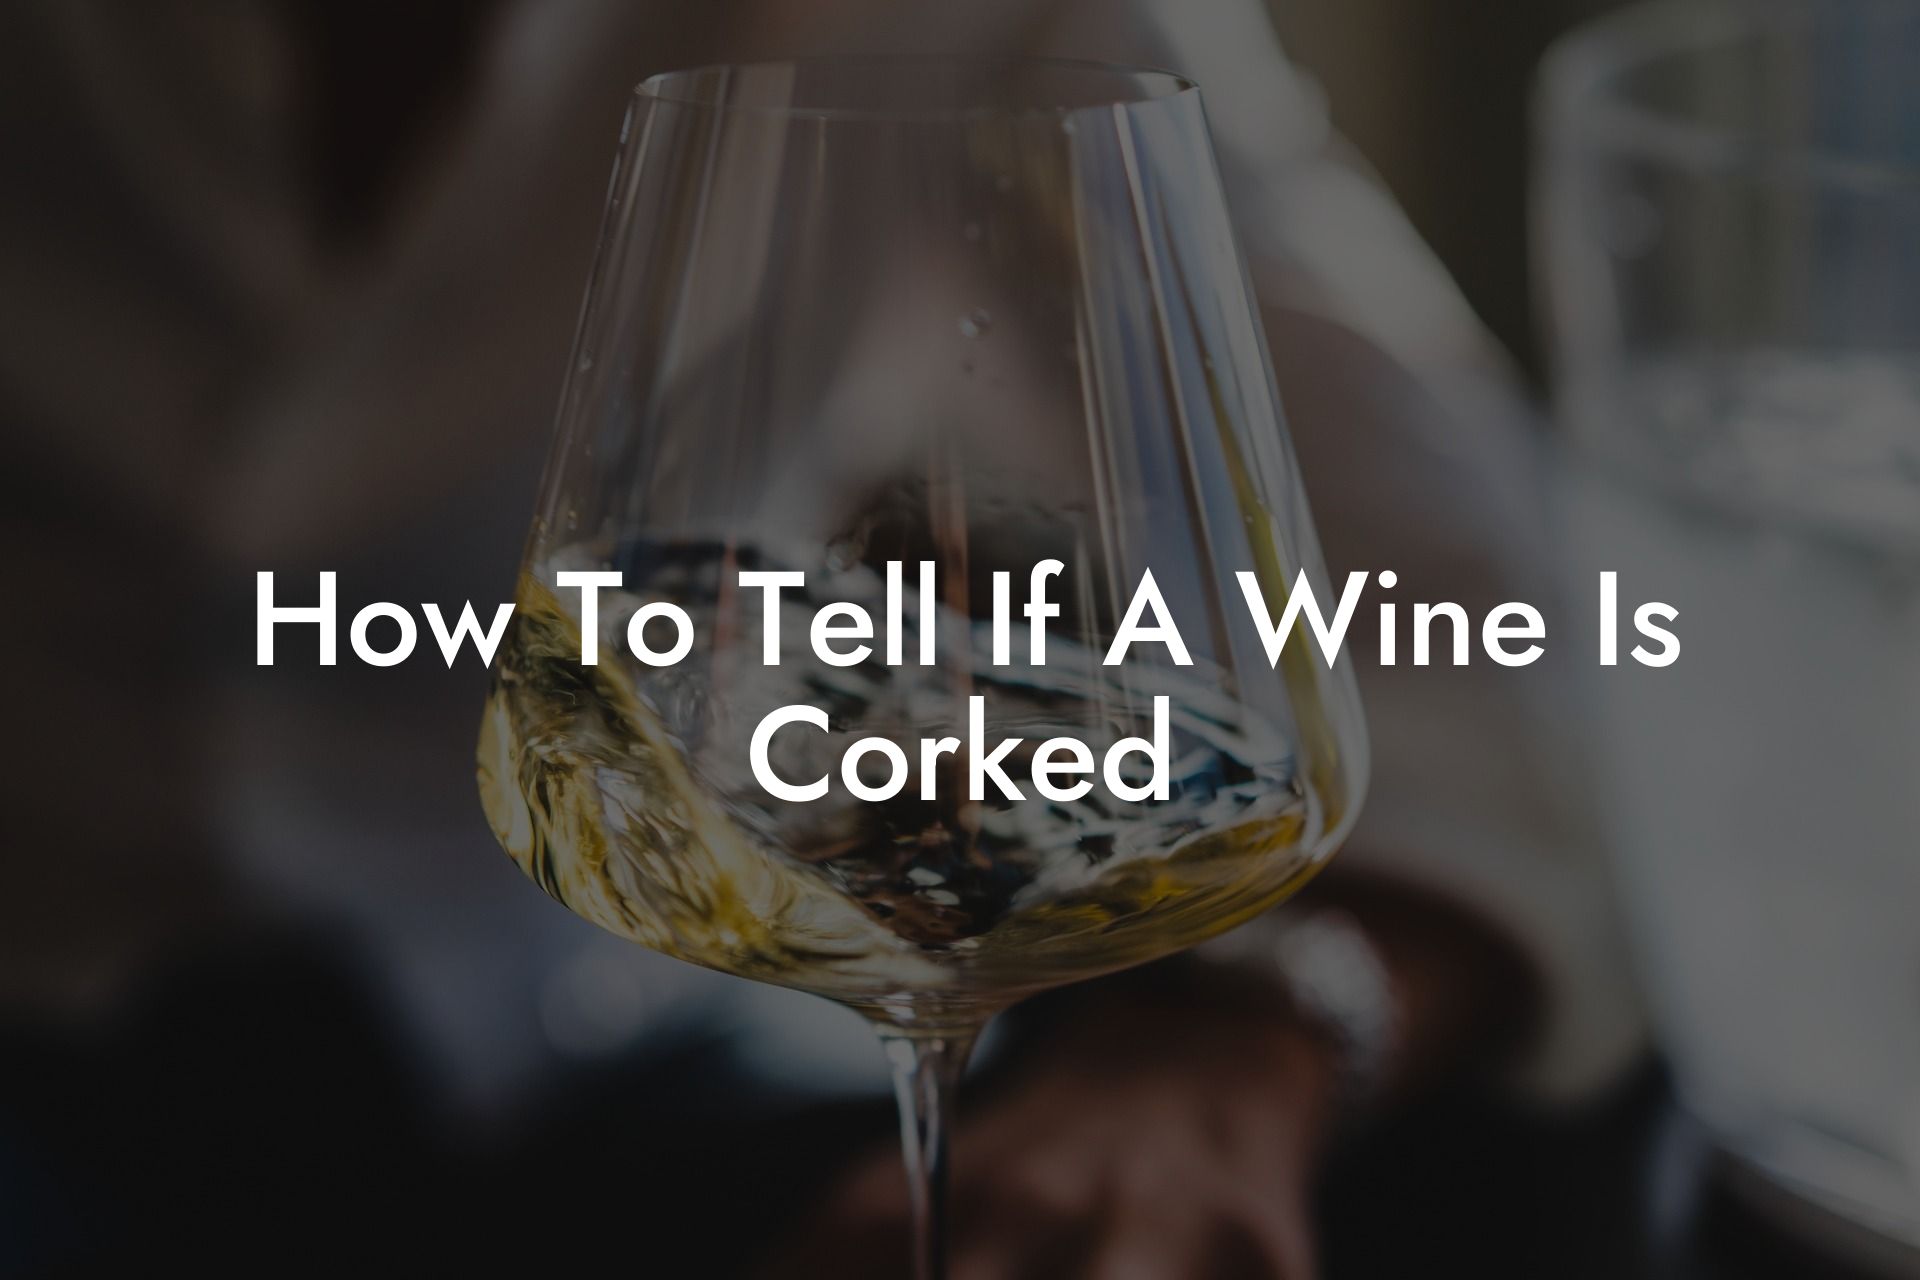 How To Tell If A Wine Is Corked